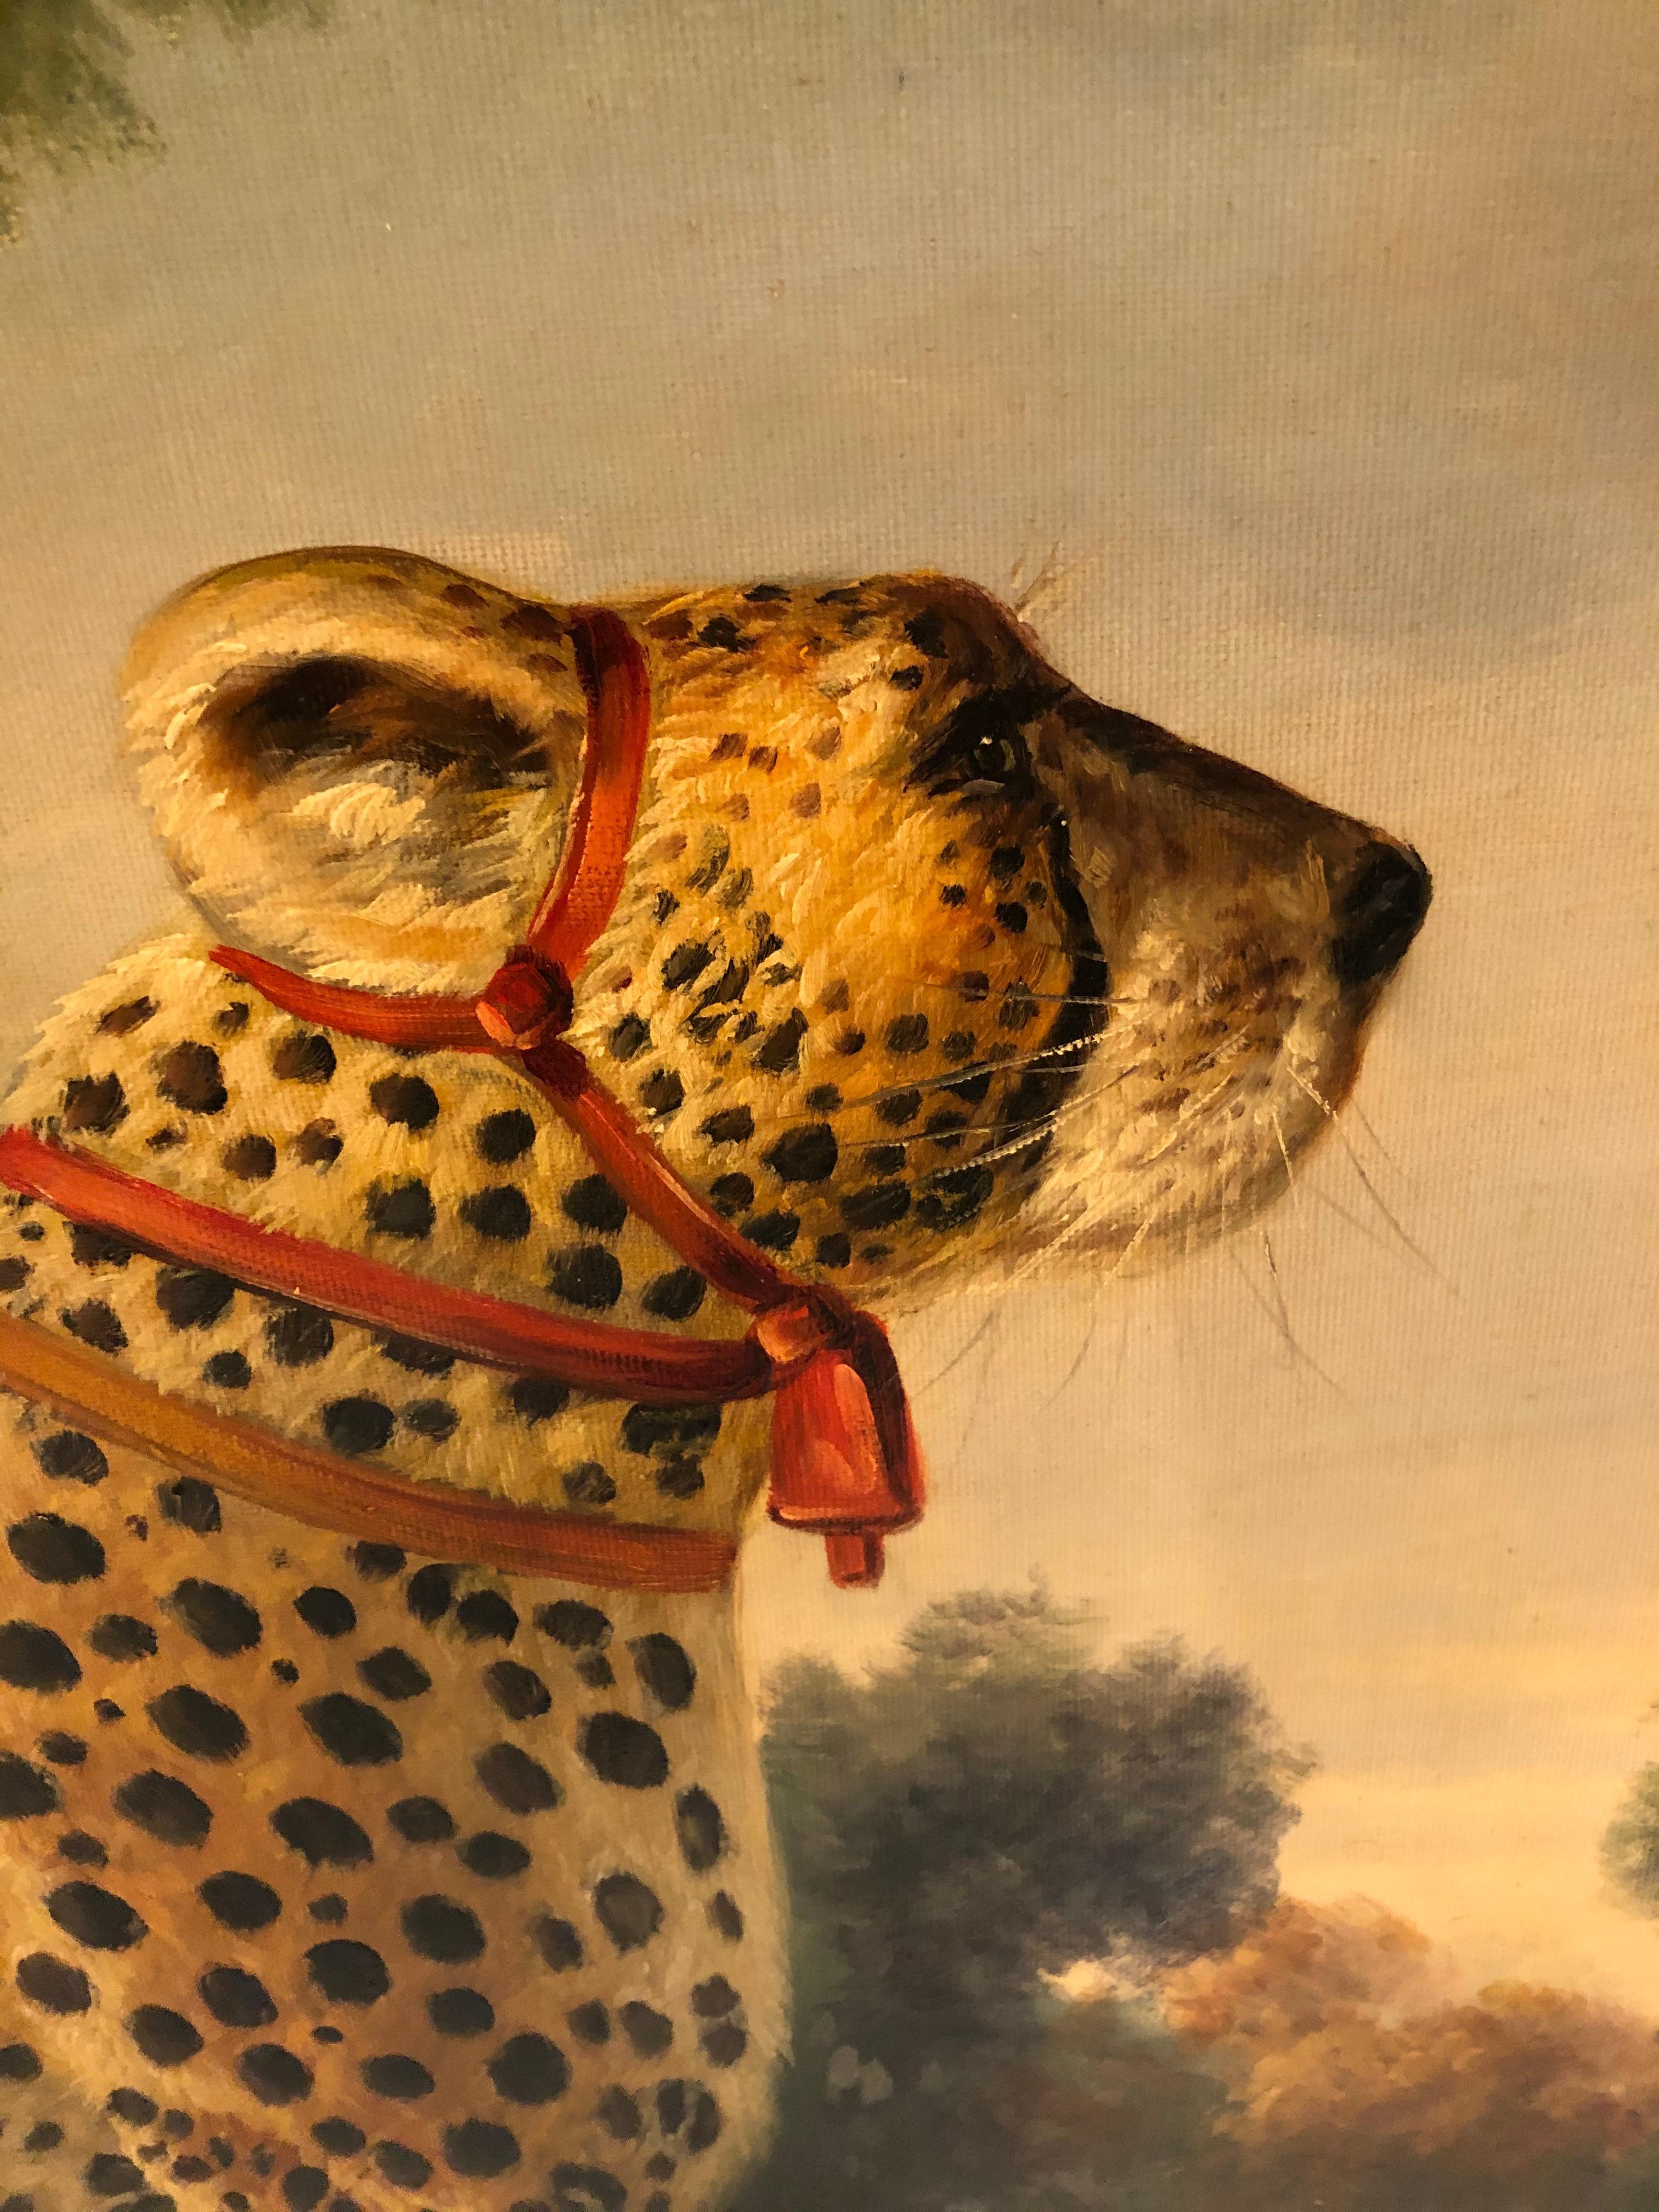 An incredible painting of a proud cheetah, gorgeously rendered so one can practically touch its soft fur. Signed lower left M.P. Elliot, this is an expertly painted canvas that looks like a famous piece painted by the collectible California artist